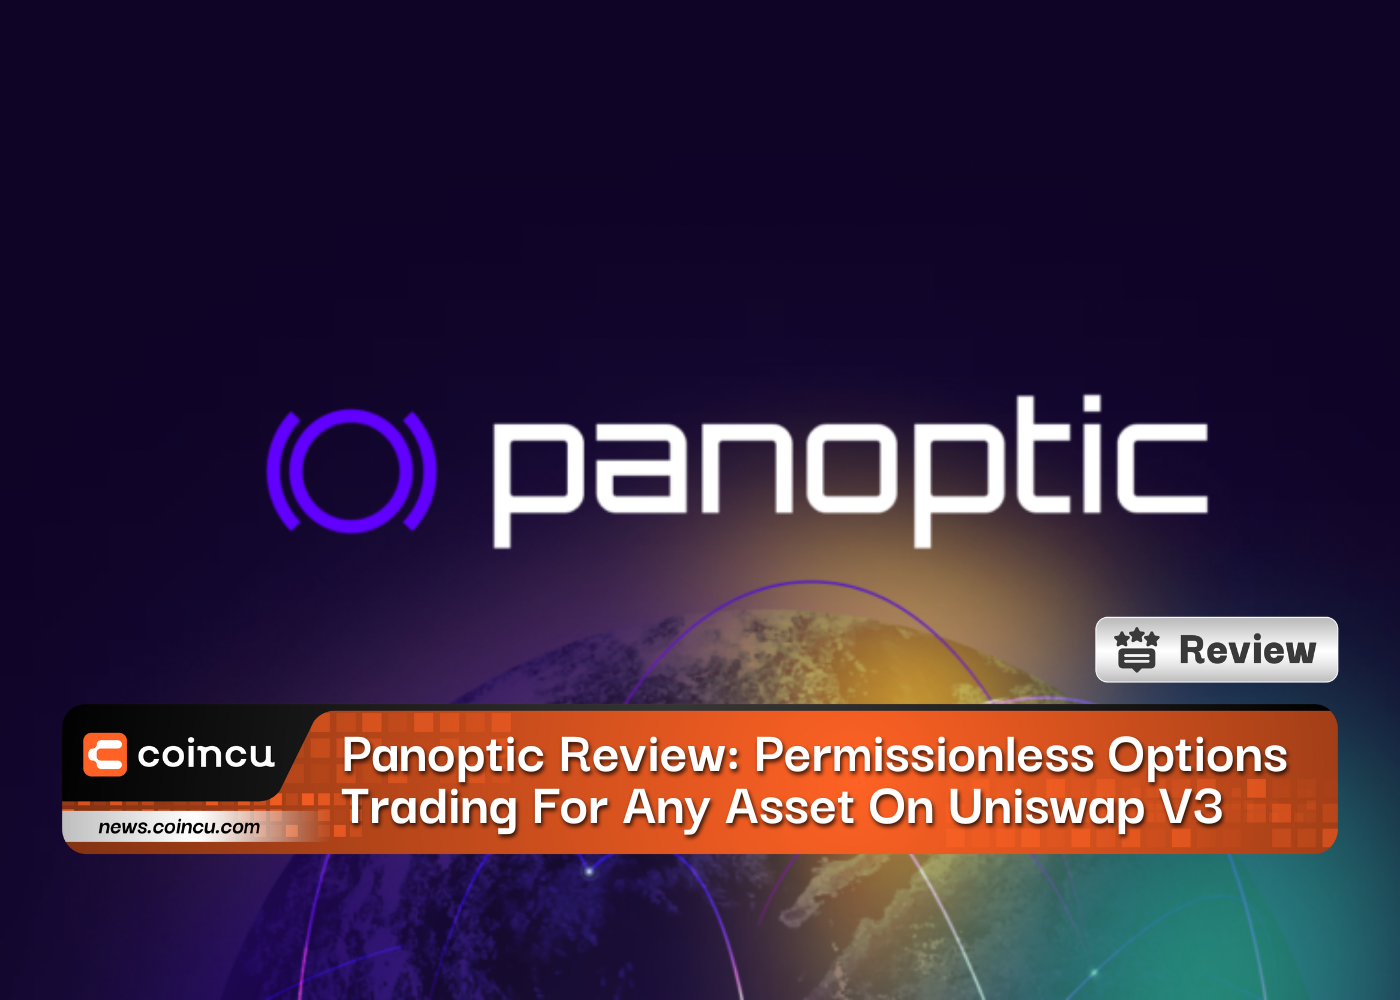 Panoptic Review: Permissionless Options Trading For Any Asset On Uniswap V3